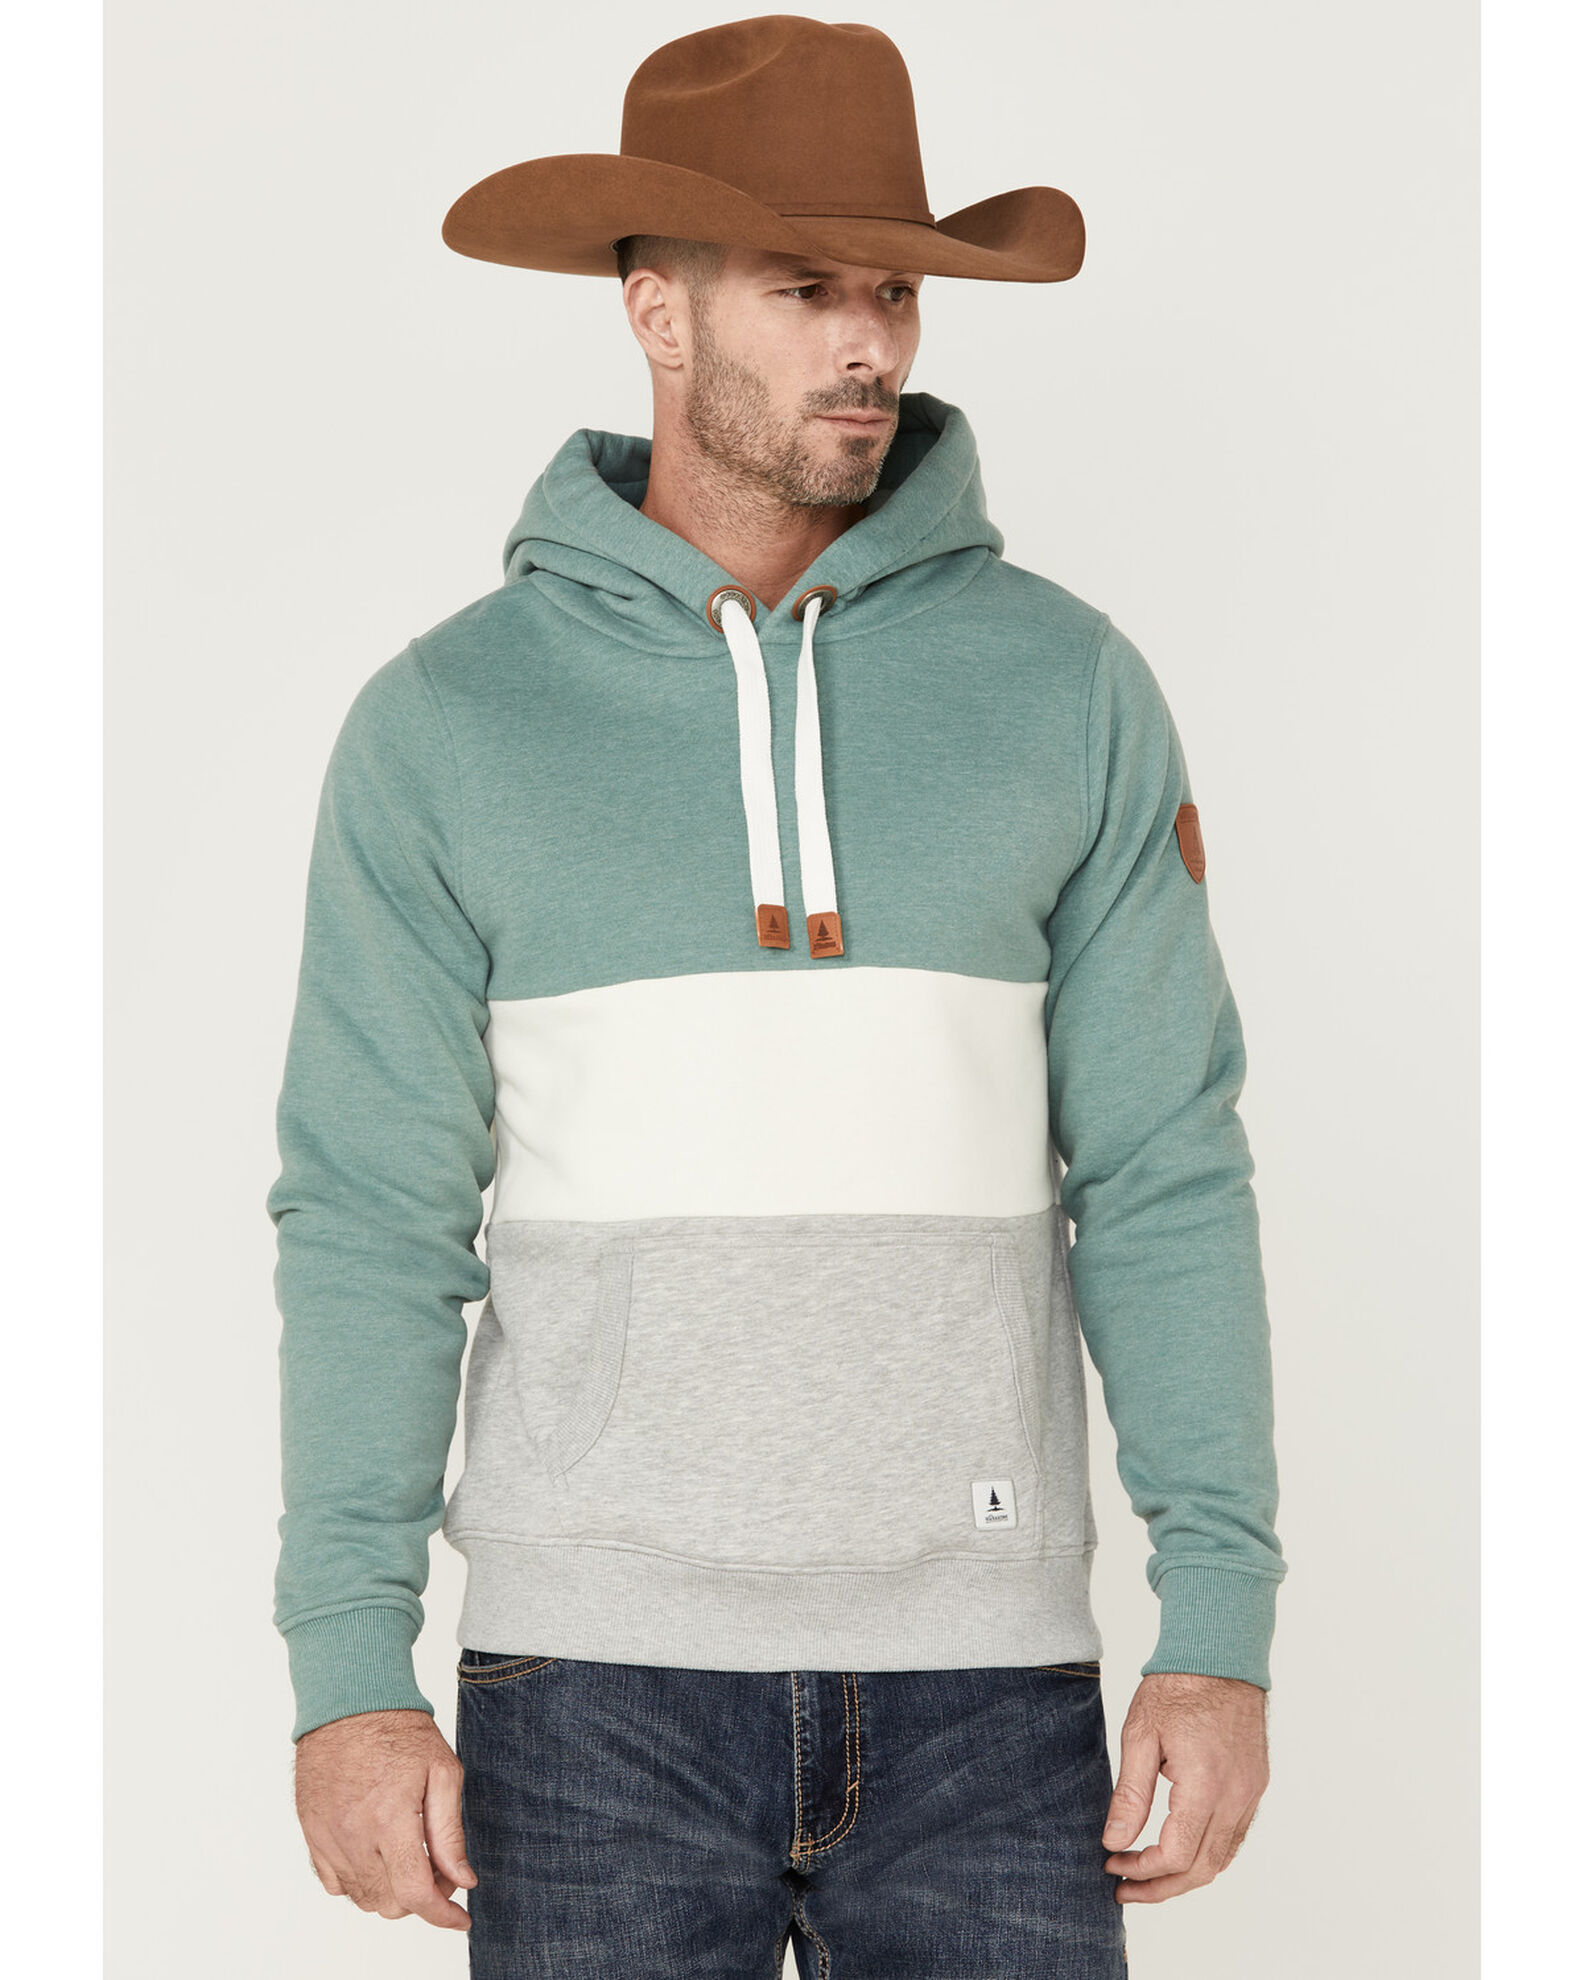 Wanakome Men's Colorblock Rivera Hooded Pullover Sweatshirt - Country  Outfitter